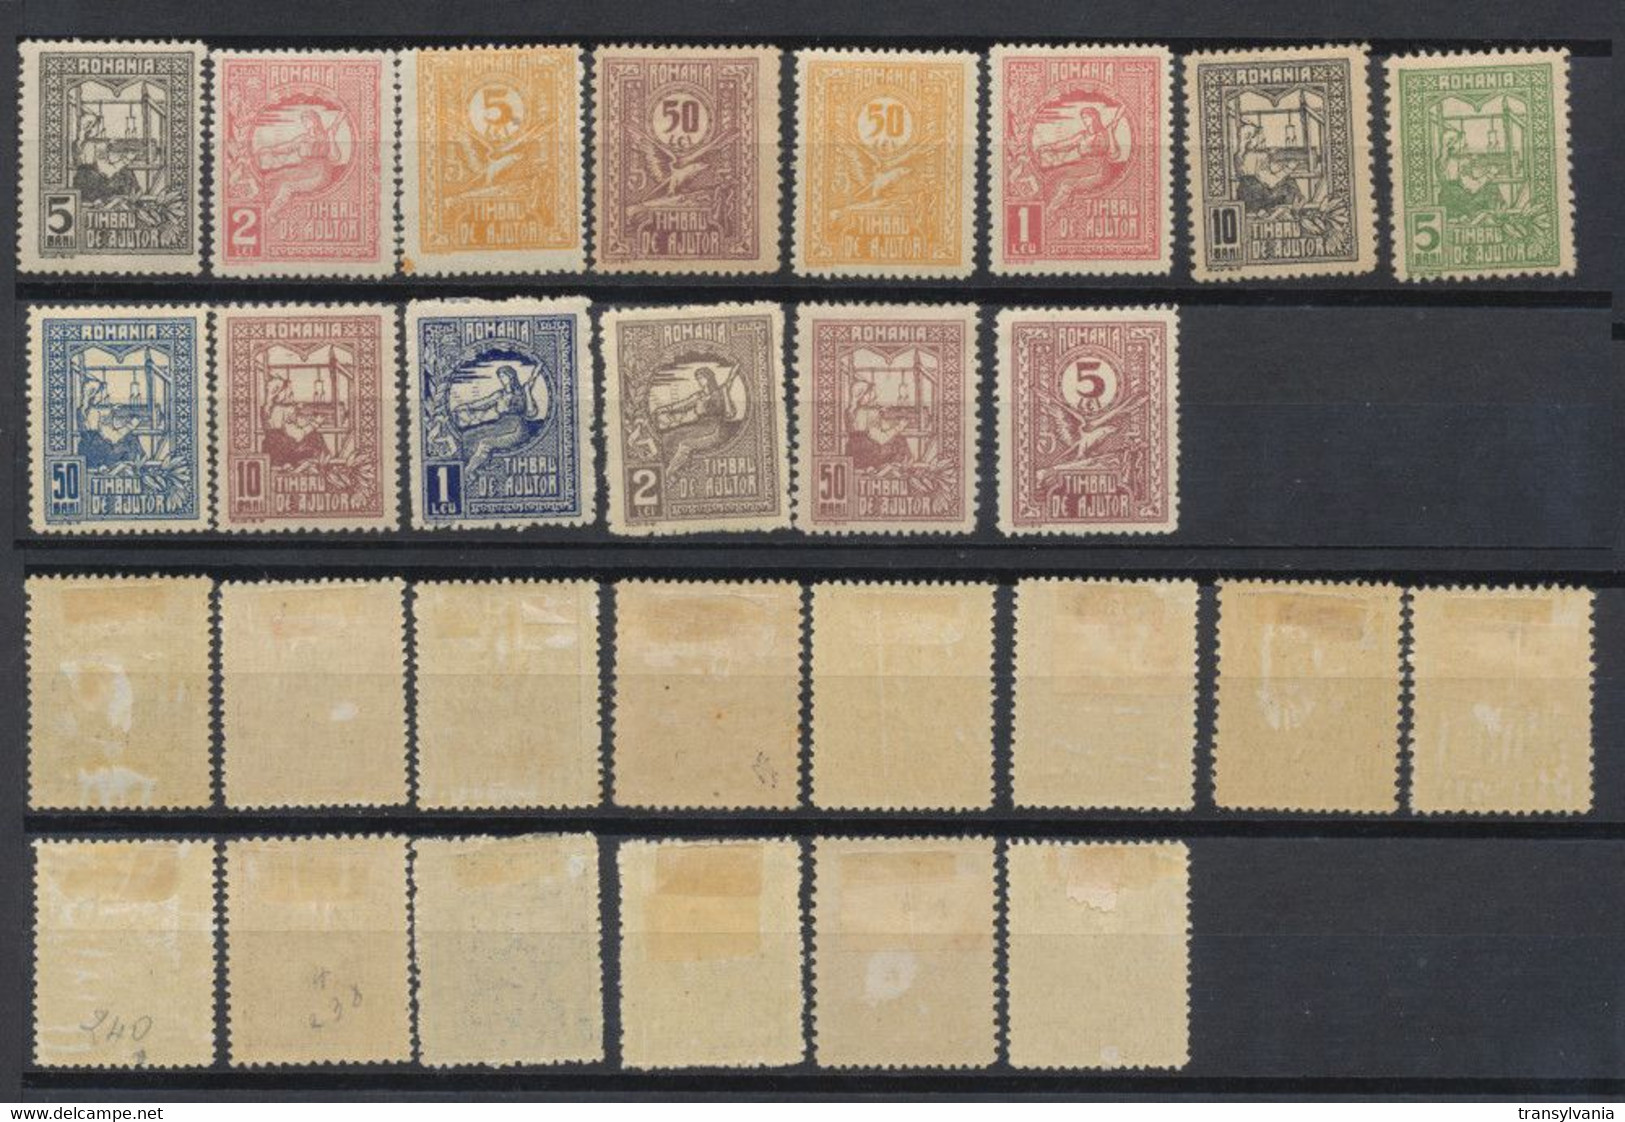 Romania 1916-1918 Rare Set Of 14 Relief Aid Stamps MLH, Only 200 Complete Sets Issued - Varietà & Curiosità